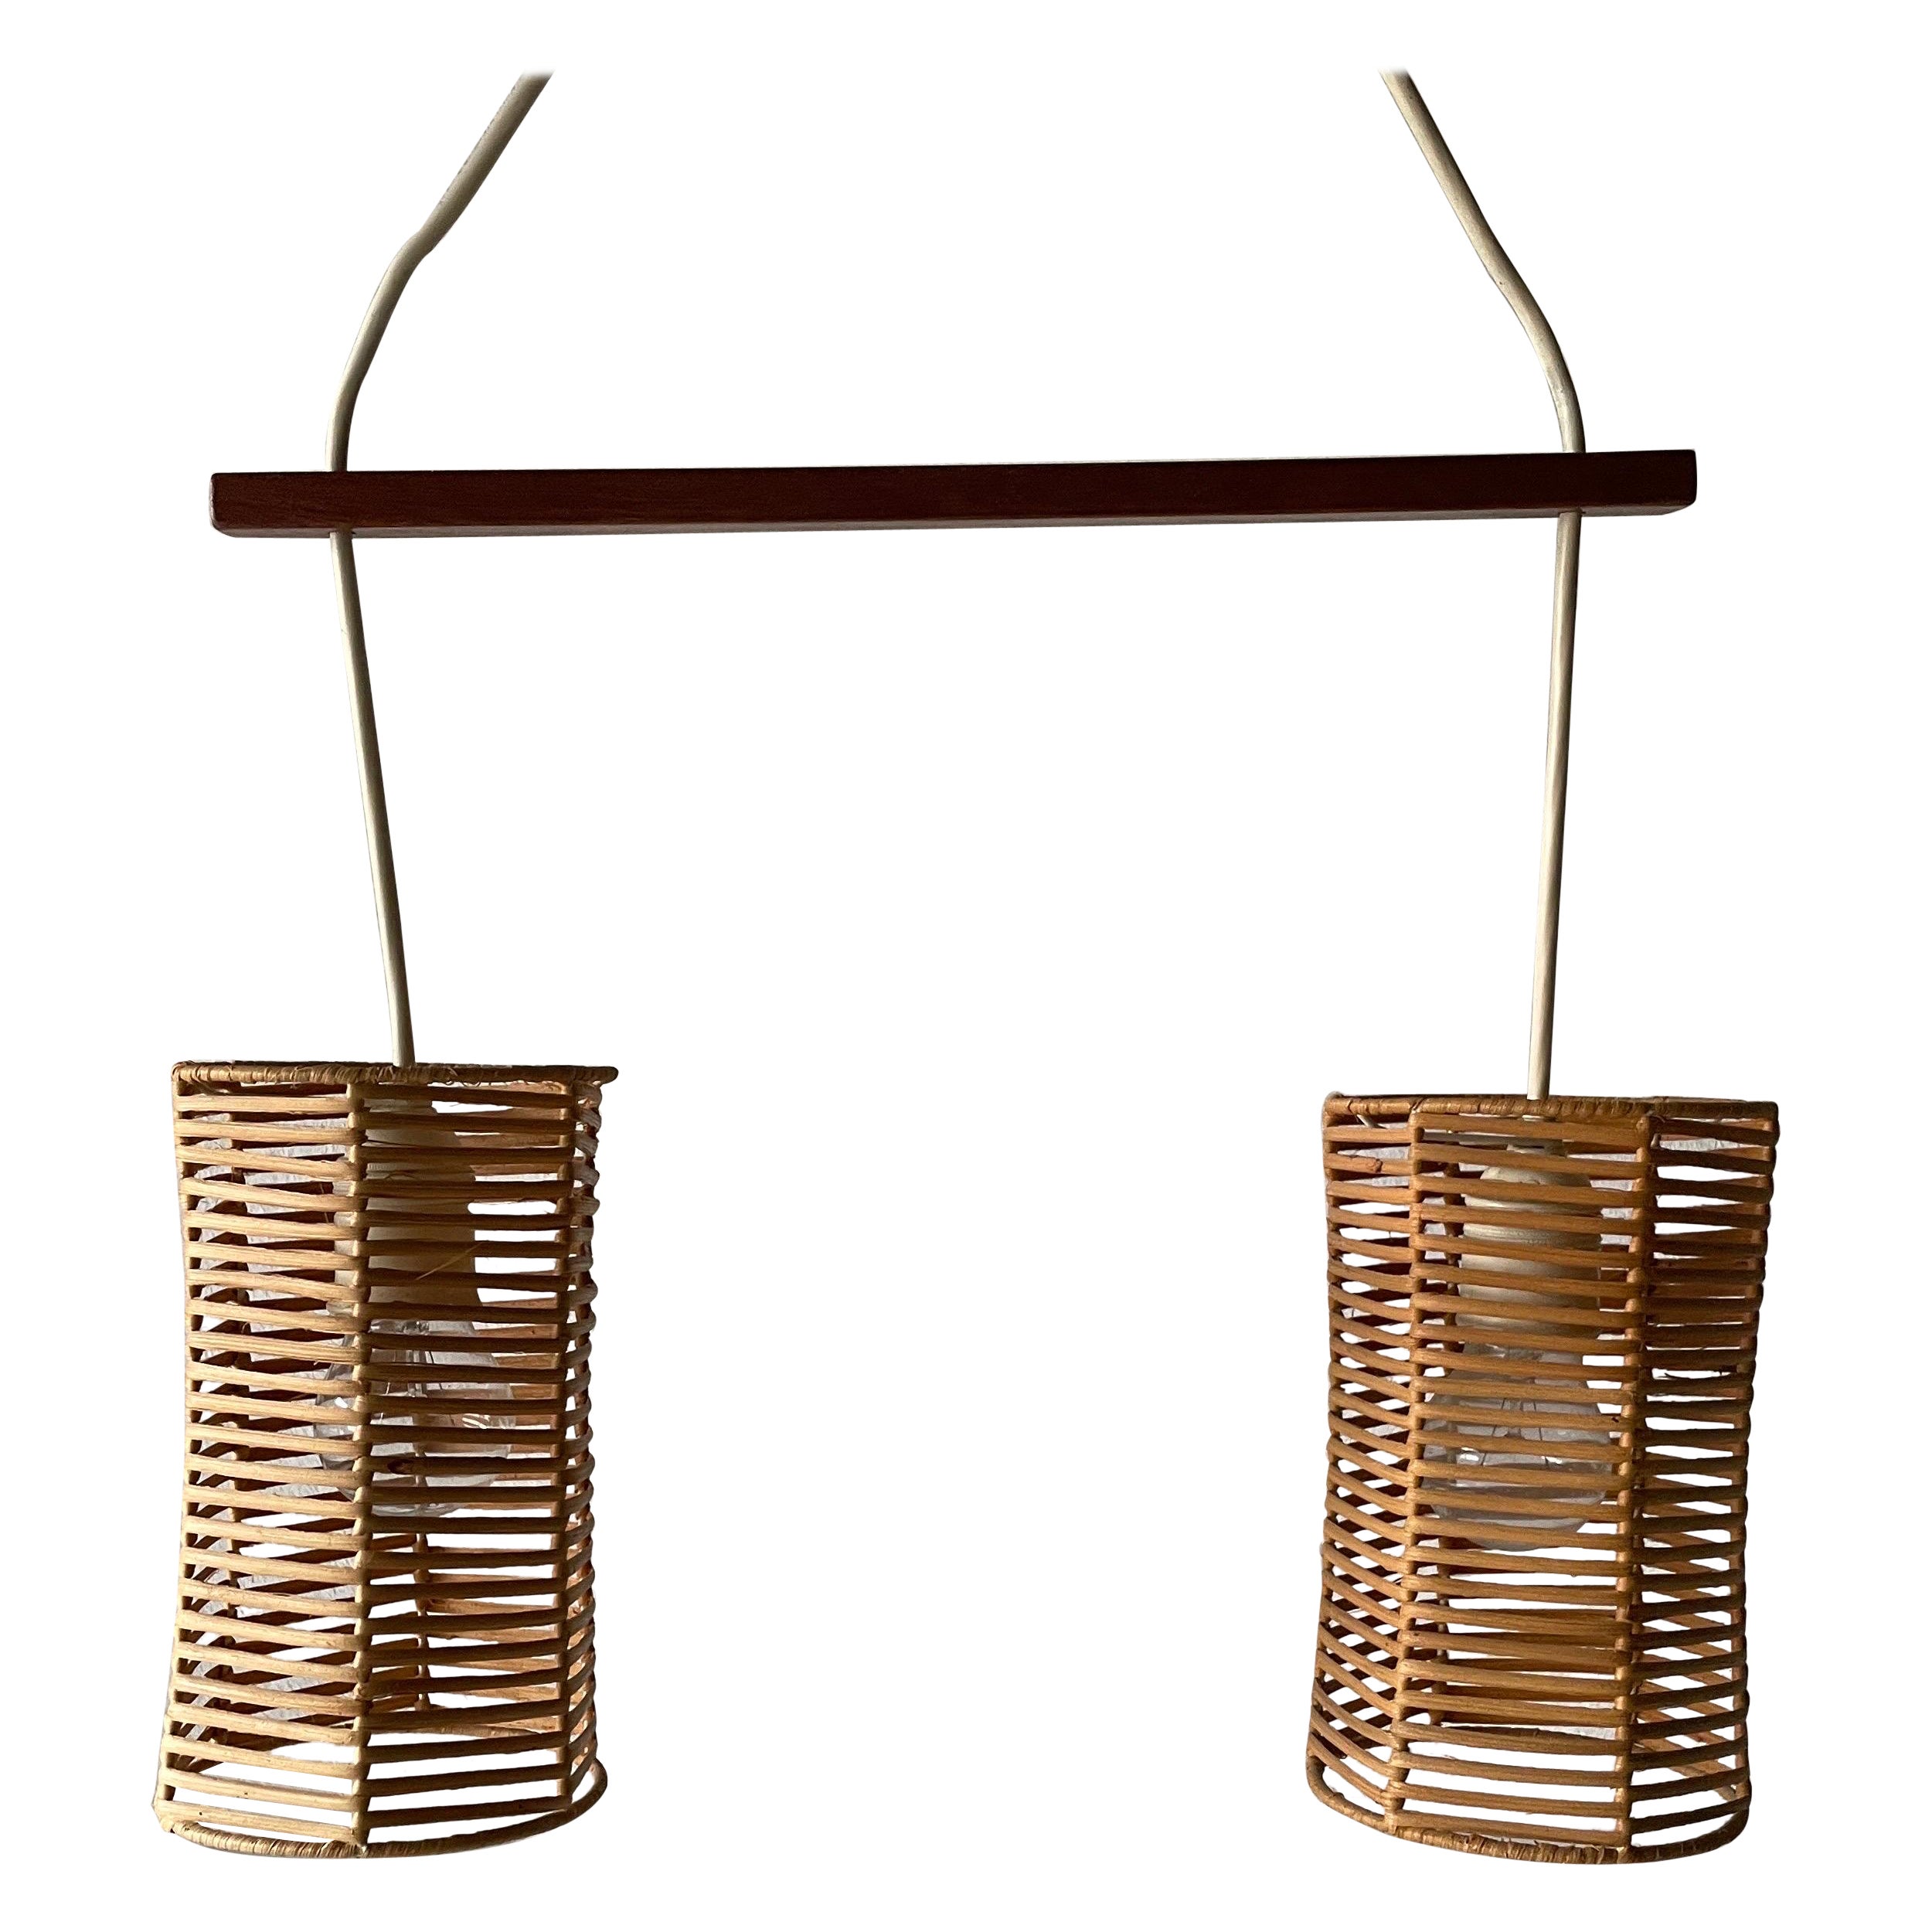 Double Shade Wicker and Wood Pendant Lamp, 1960s, Germany For Sale